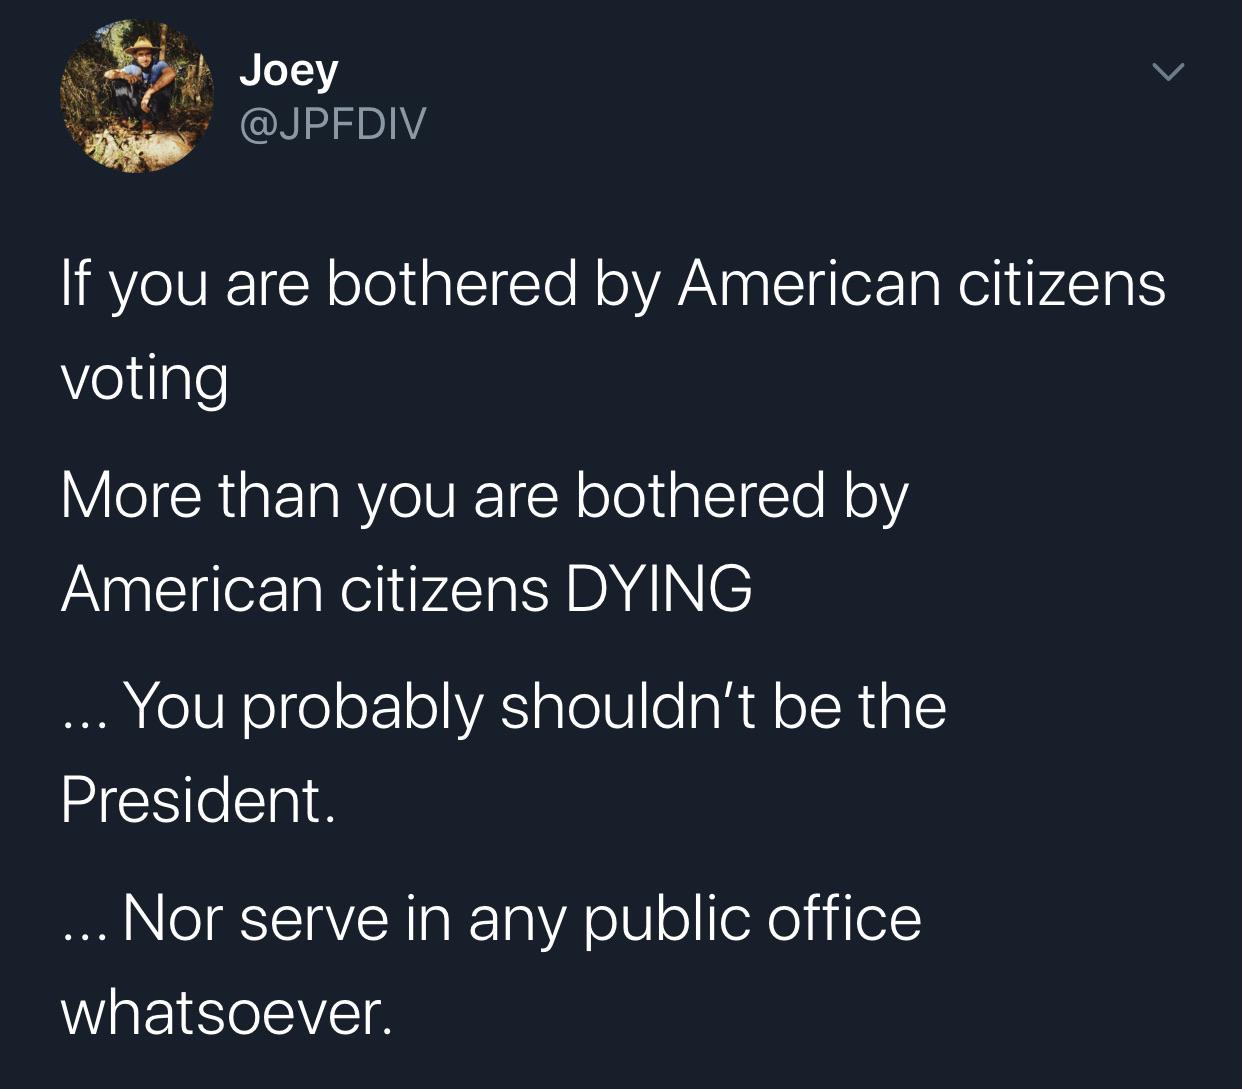 Political, America, Trump, Republicans, TV, Nice Political Memes Political, America, Trump, Republicans, TV, Nice text: Joey @JPFDIV If you are bothered by American citizens voting More than you are bothered by American citizens DYING .. You probably shouldn't be the President. Nor serve in any public office whatsoever. 